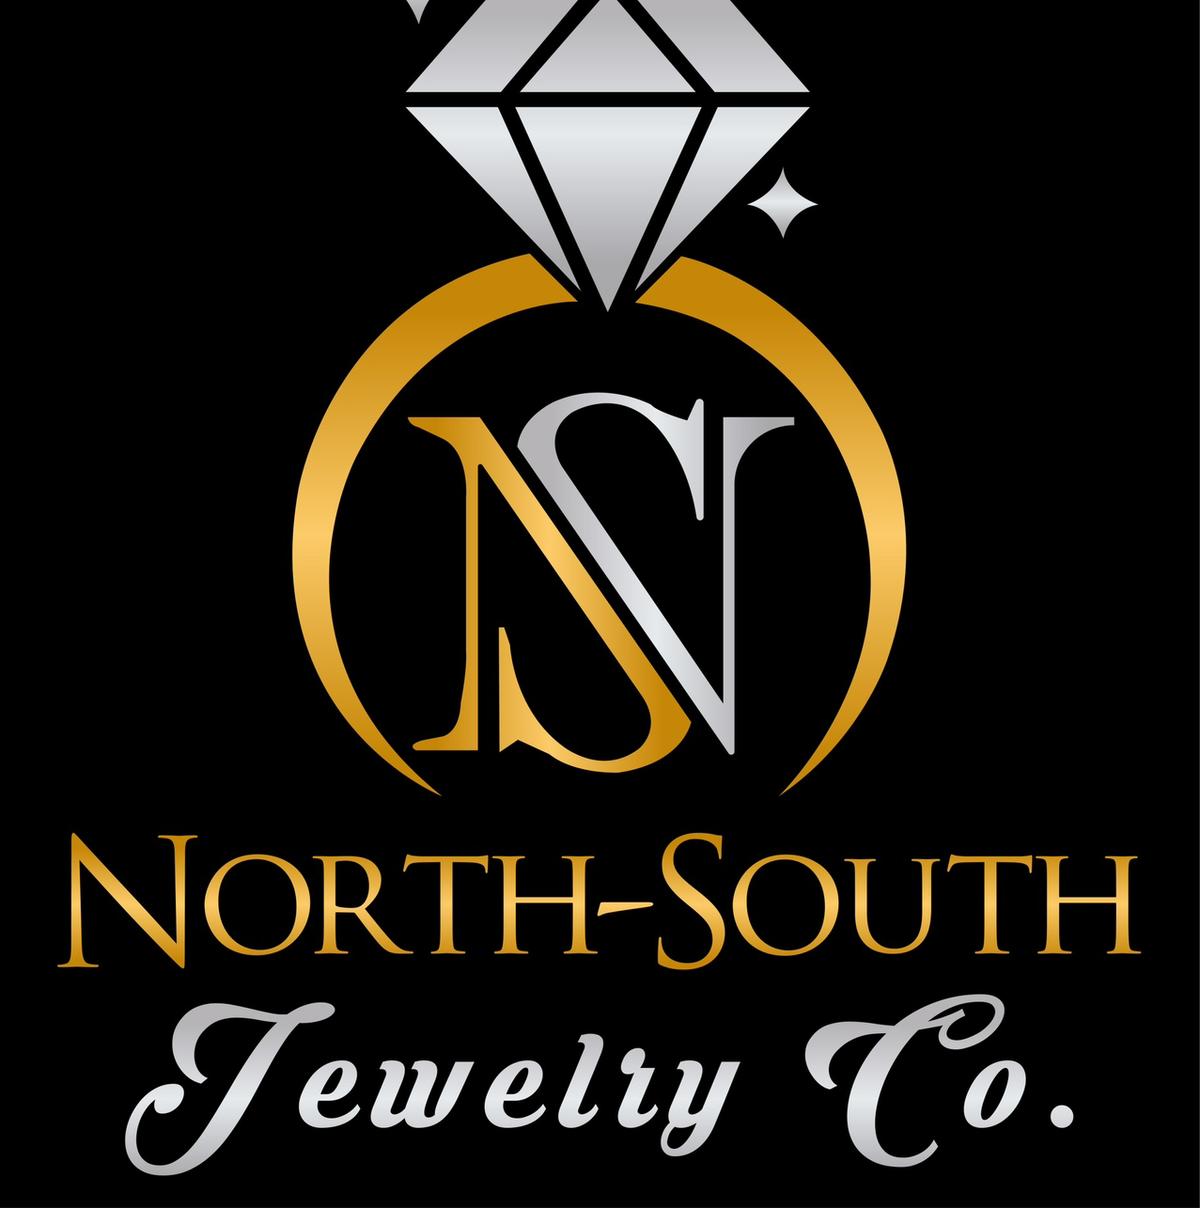 NorthSouthJewel's images